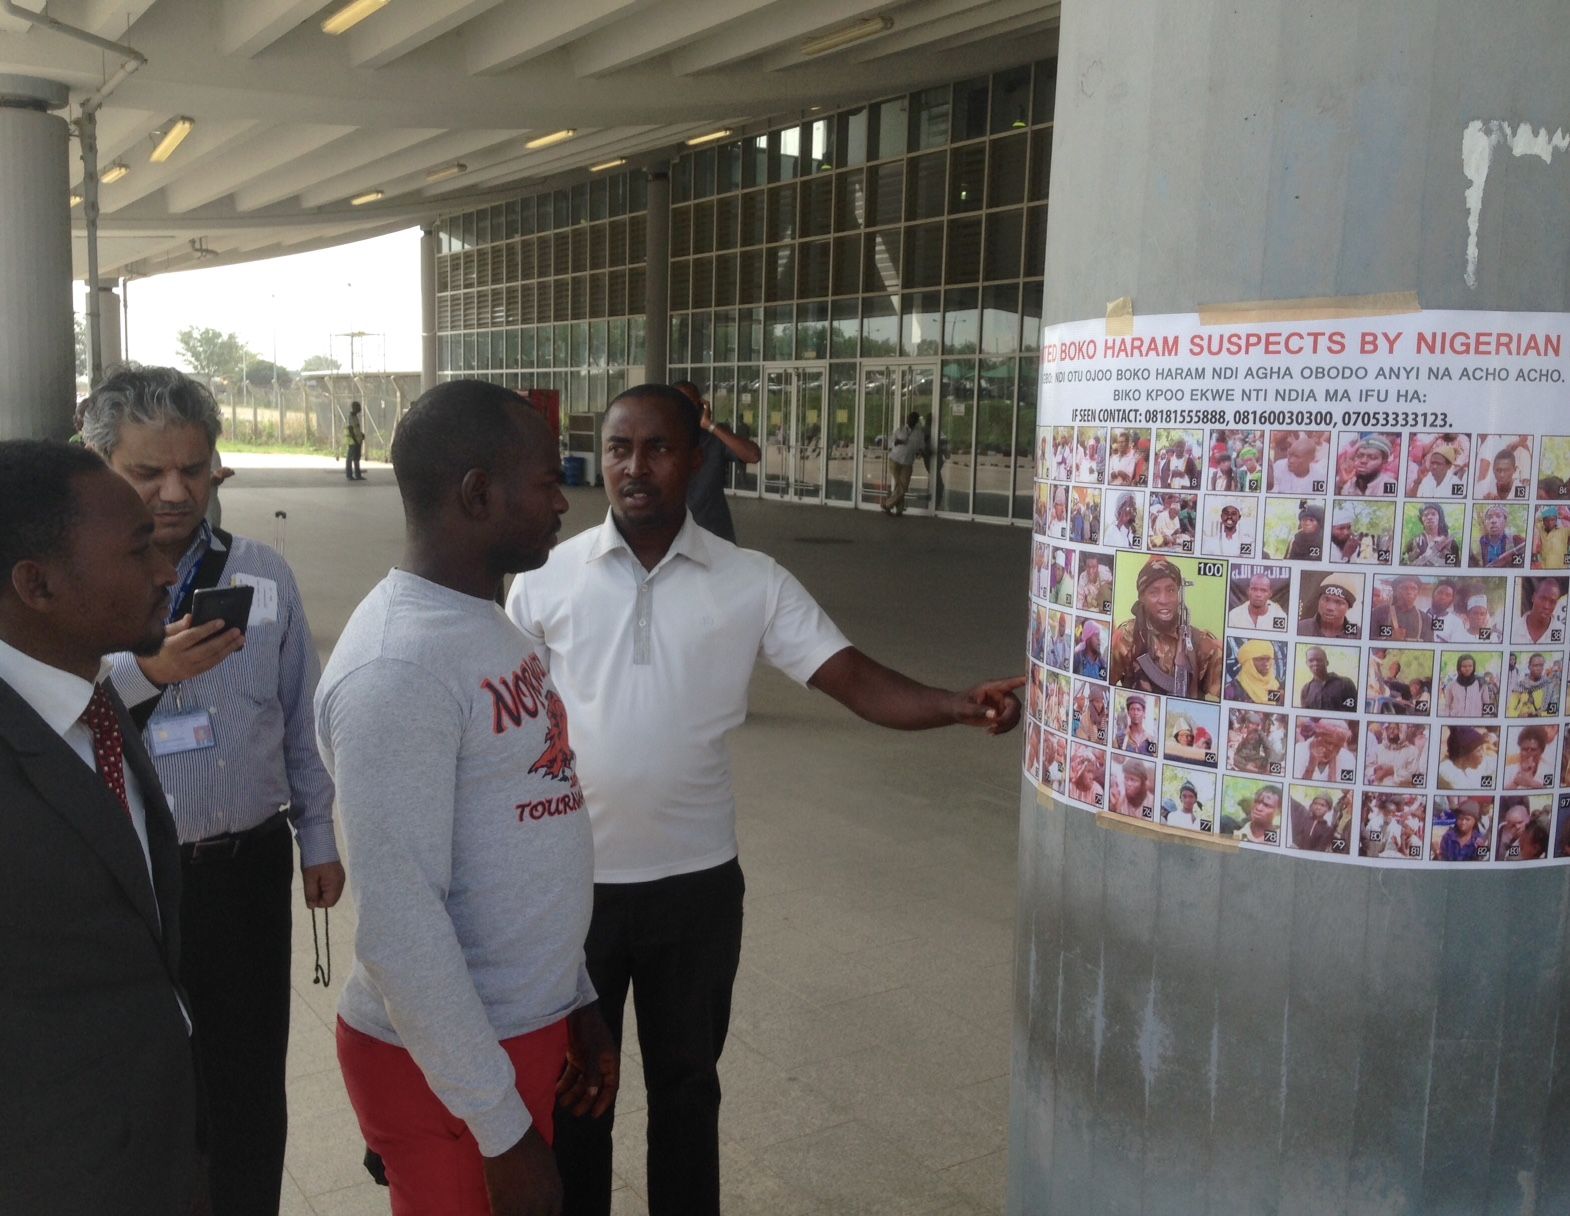 Travelers examine a most wanted poster featuring Boko Haram suspects at an airport near the Nigerian capital. Image by Jason Motlagh. November 2015.